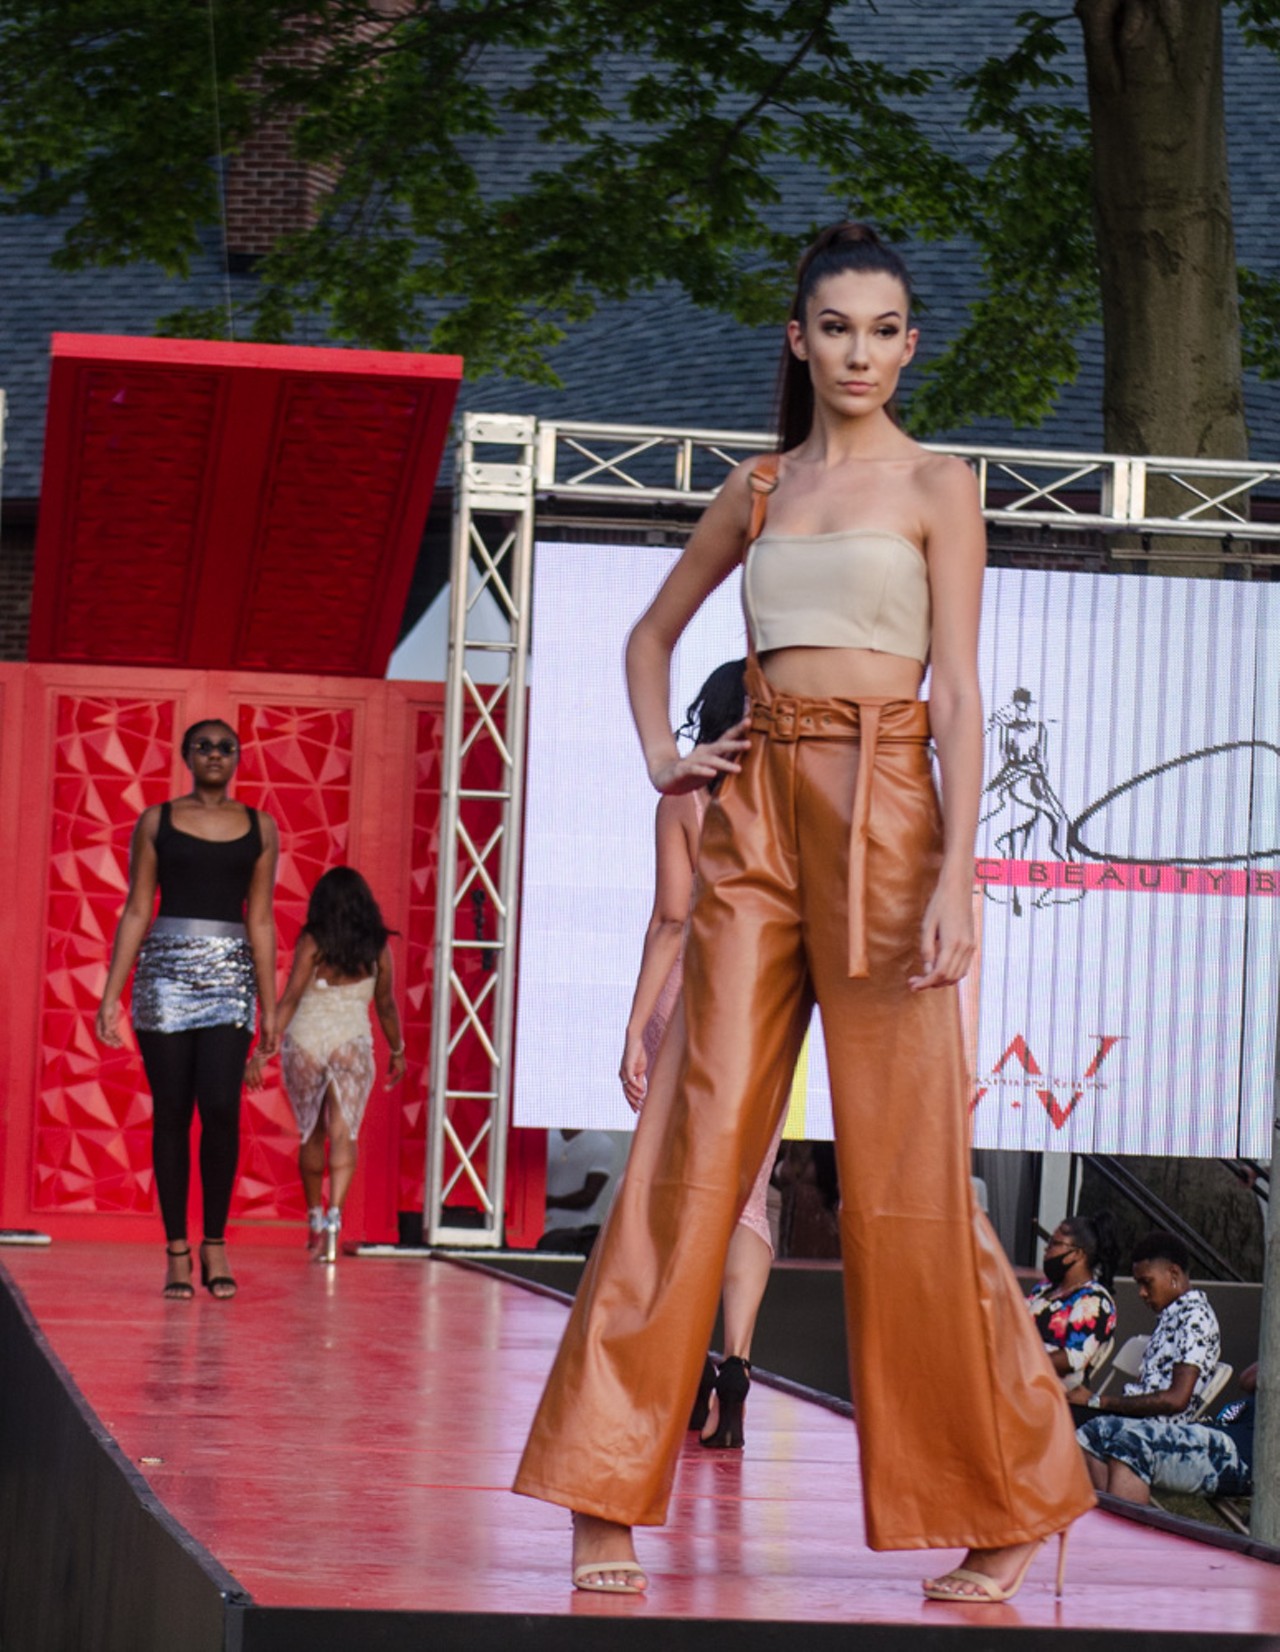 All the beautiful people we saw at the Walk Fashion Show in Detroit